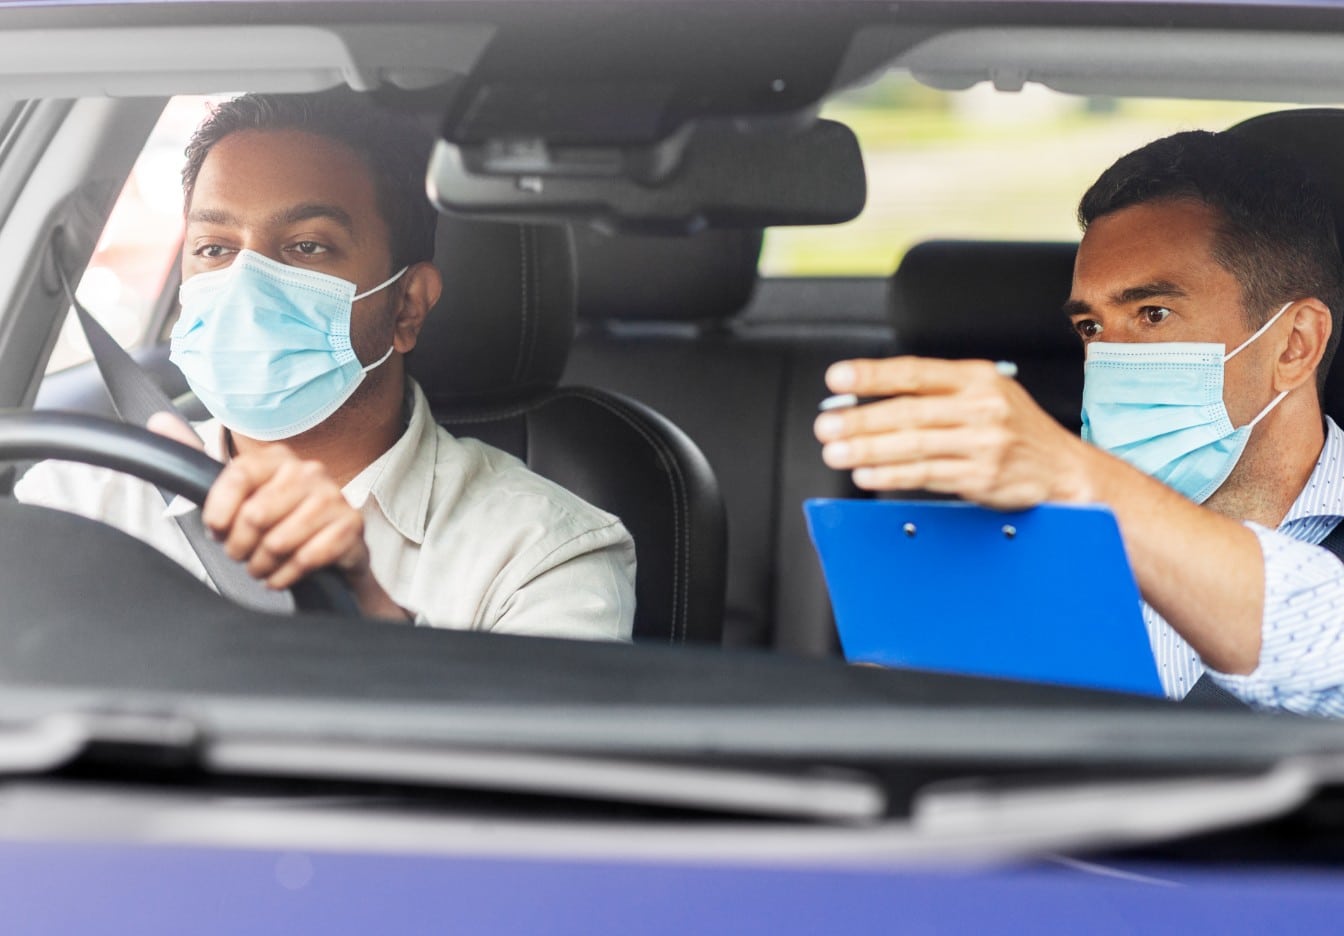 The high demand for driving instructors following the covid pandemic